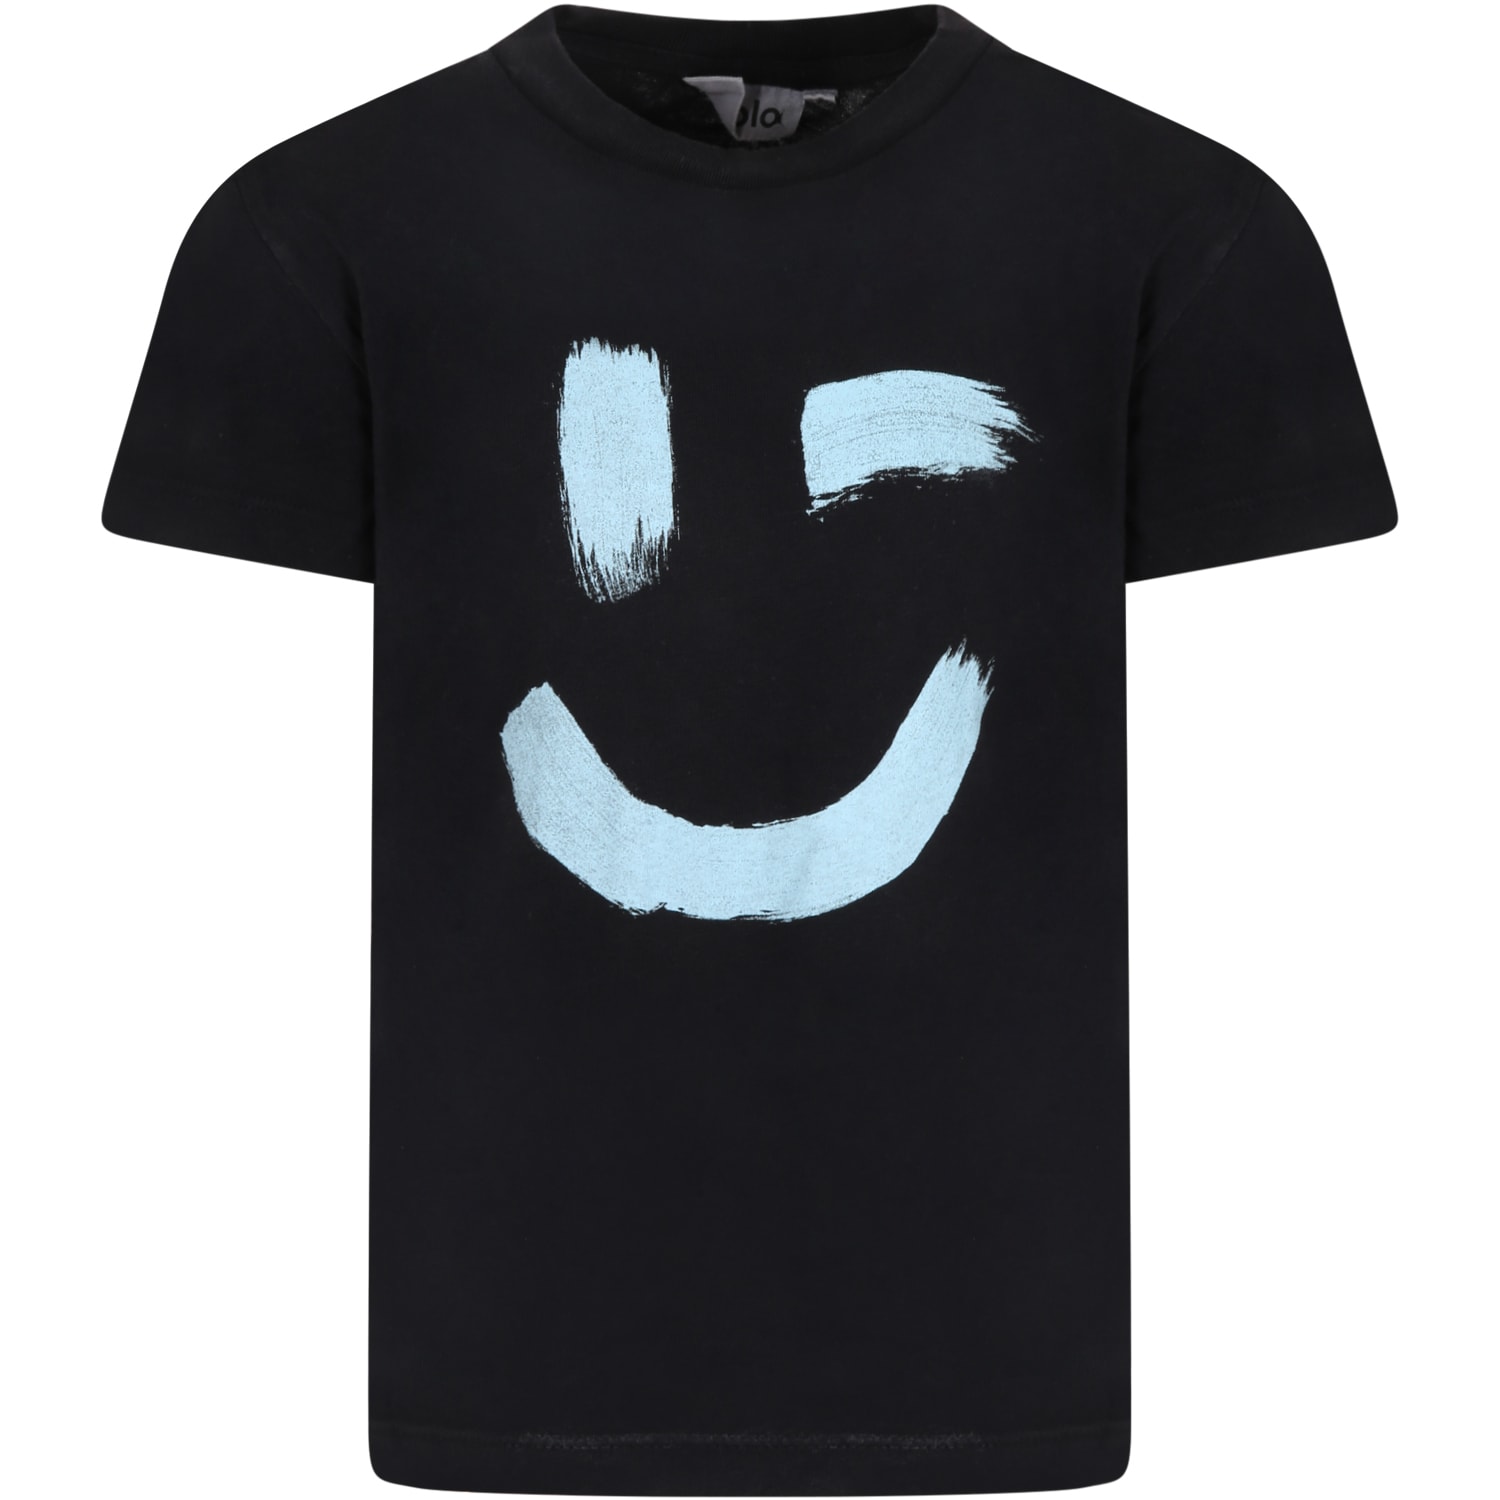 Molo Black rame T-shirt For Kids With Smile